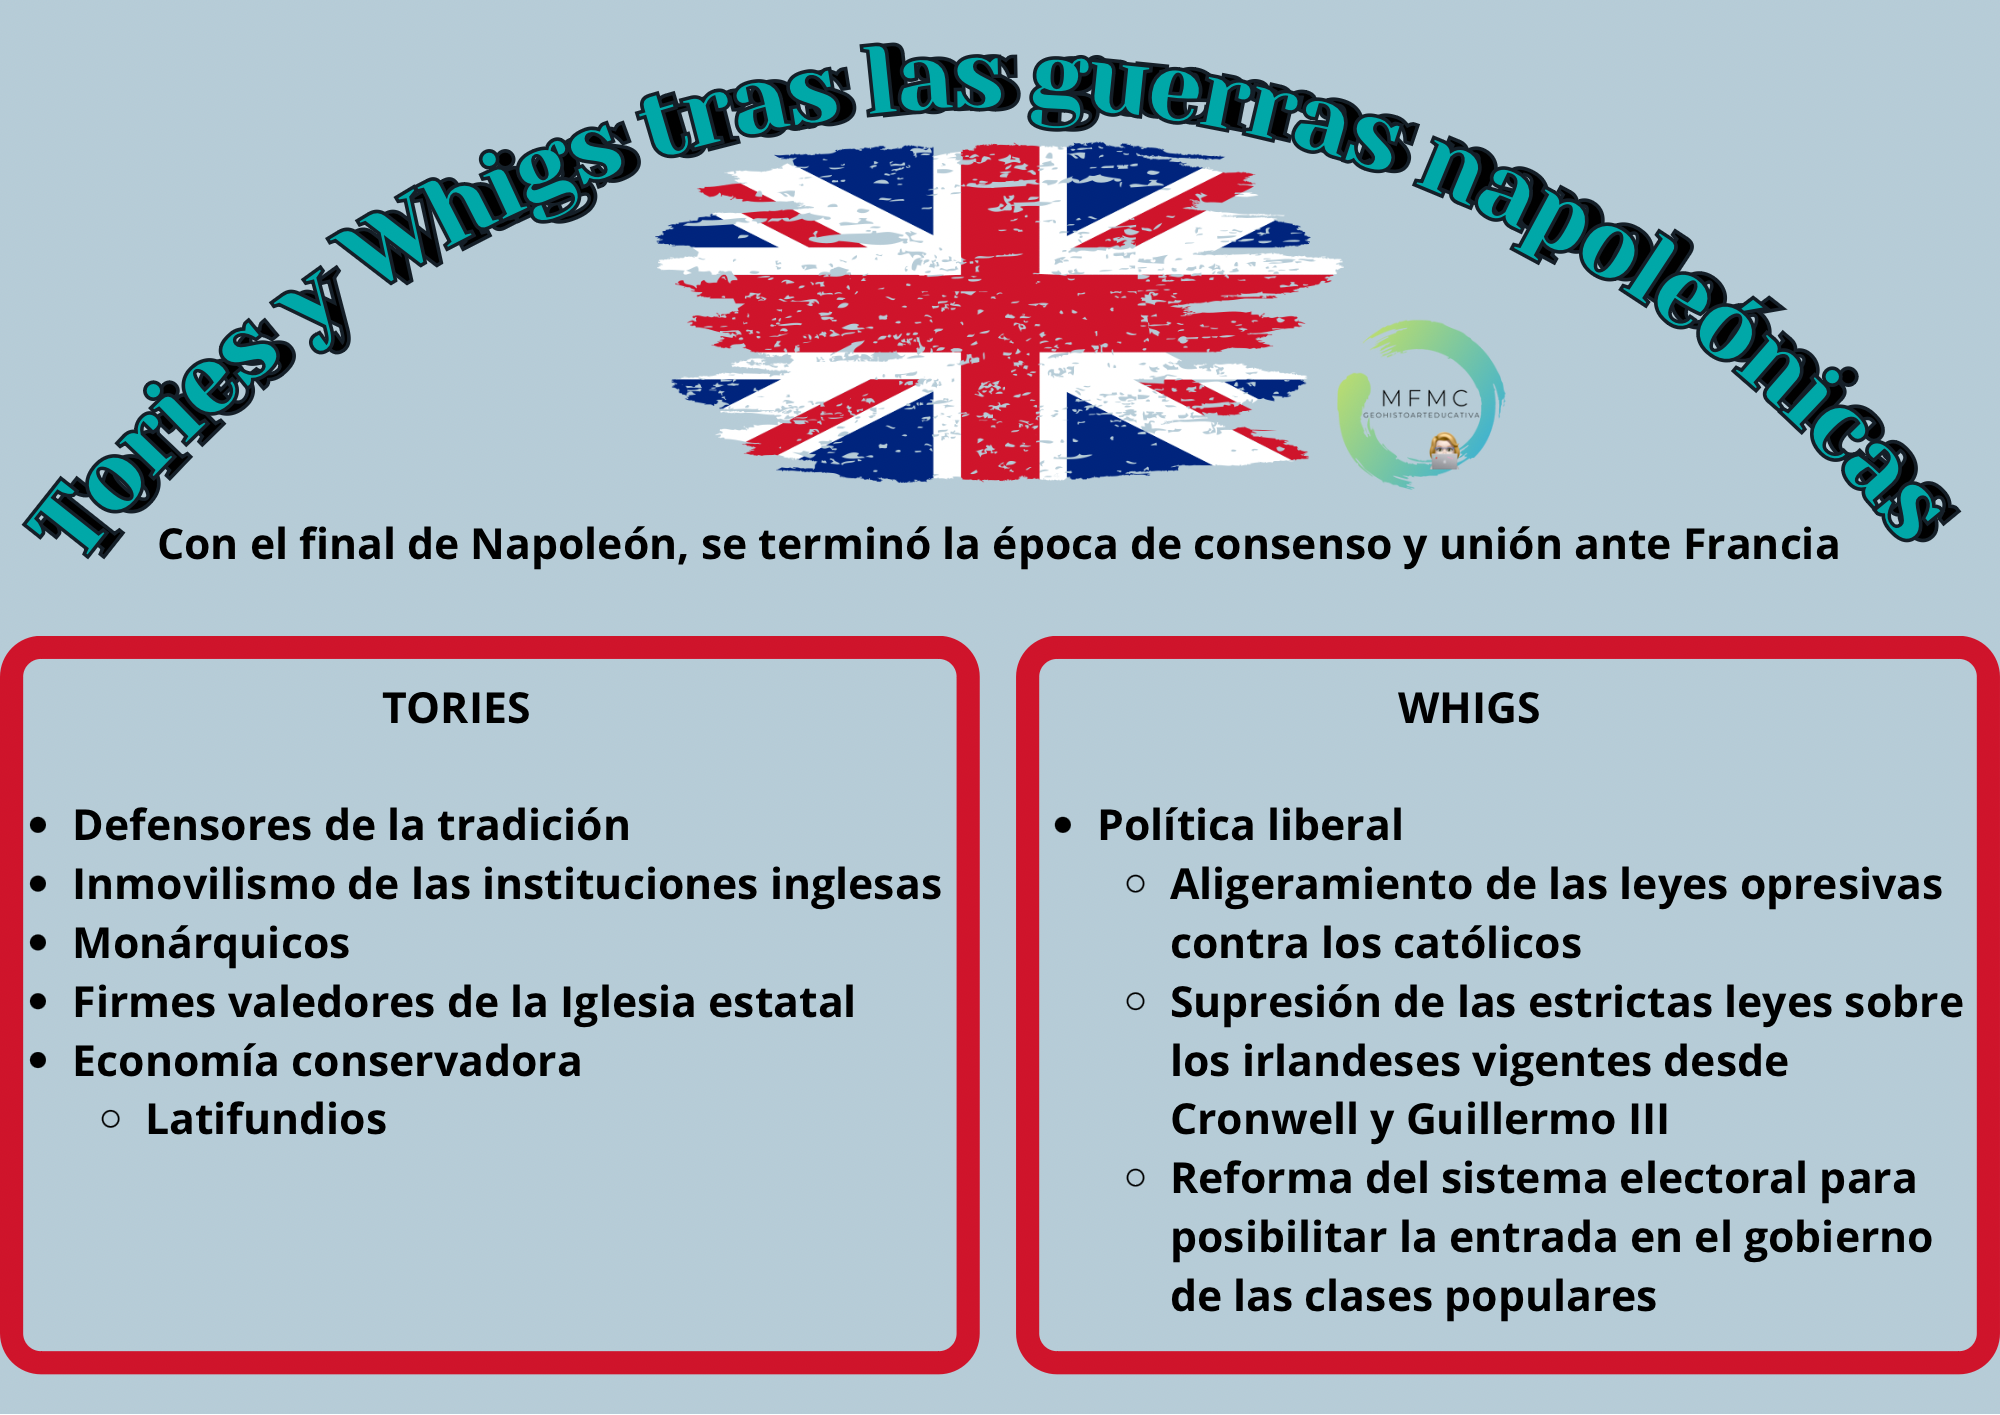 Tories y Whigs